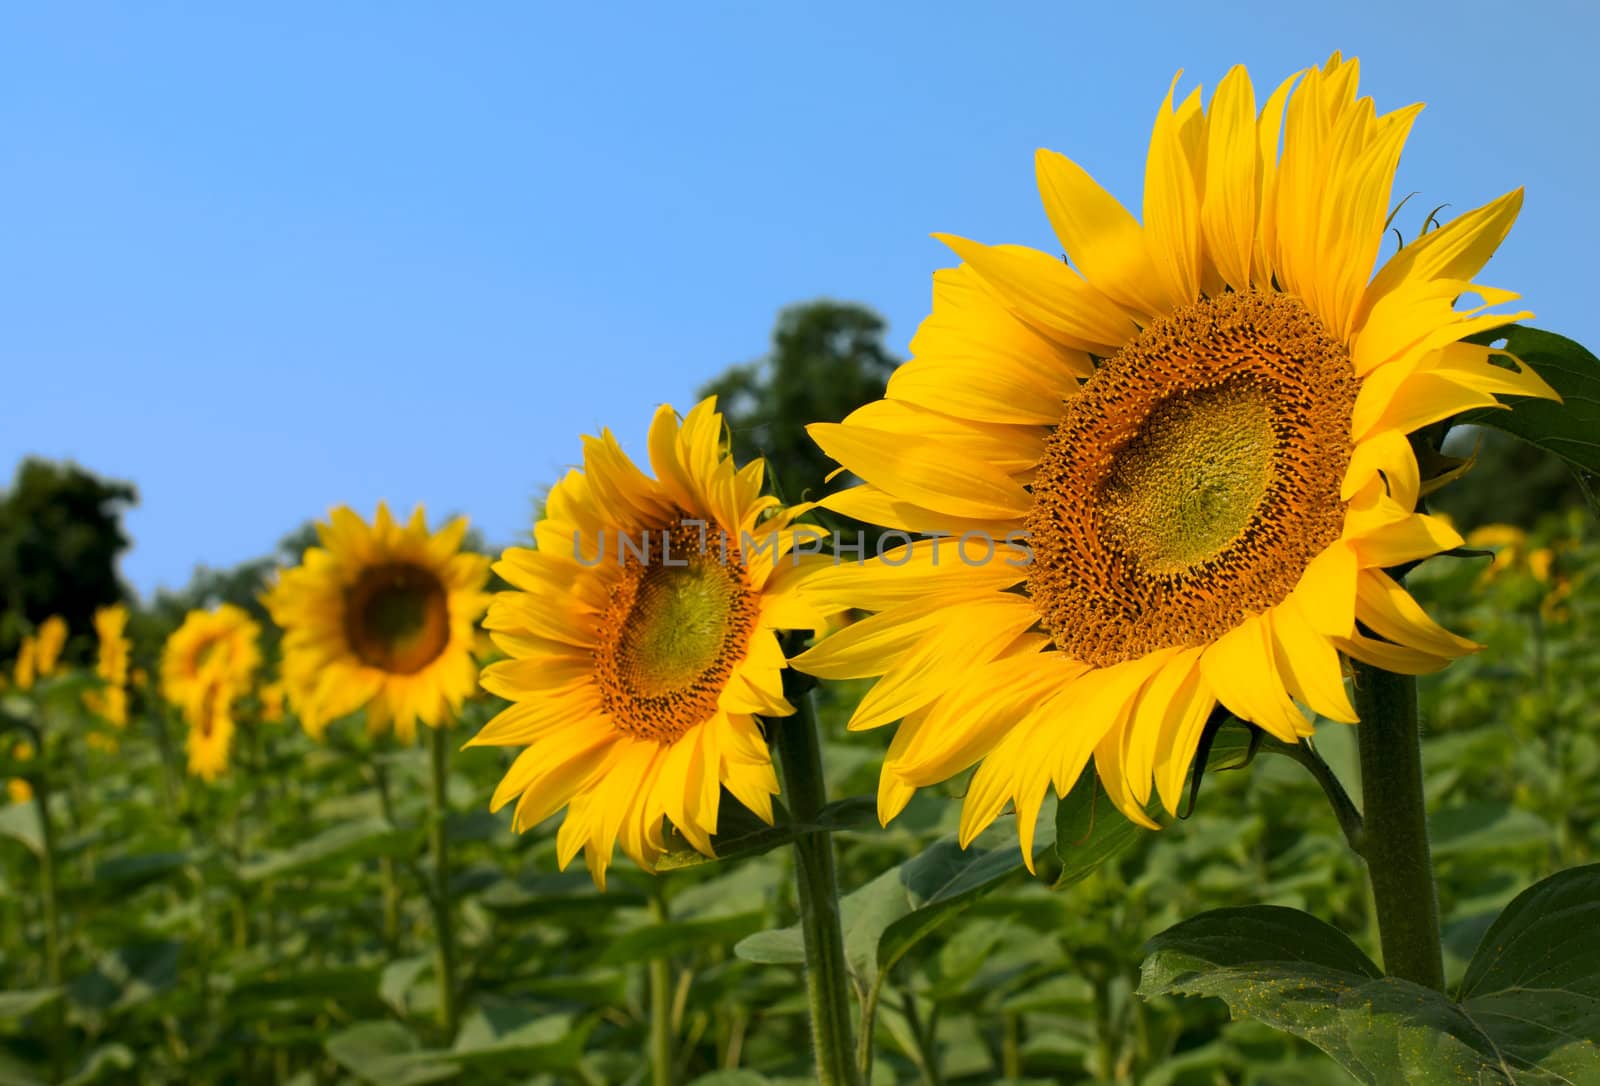 Sunflowers in a field of sunflowers and blue sky